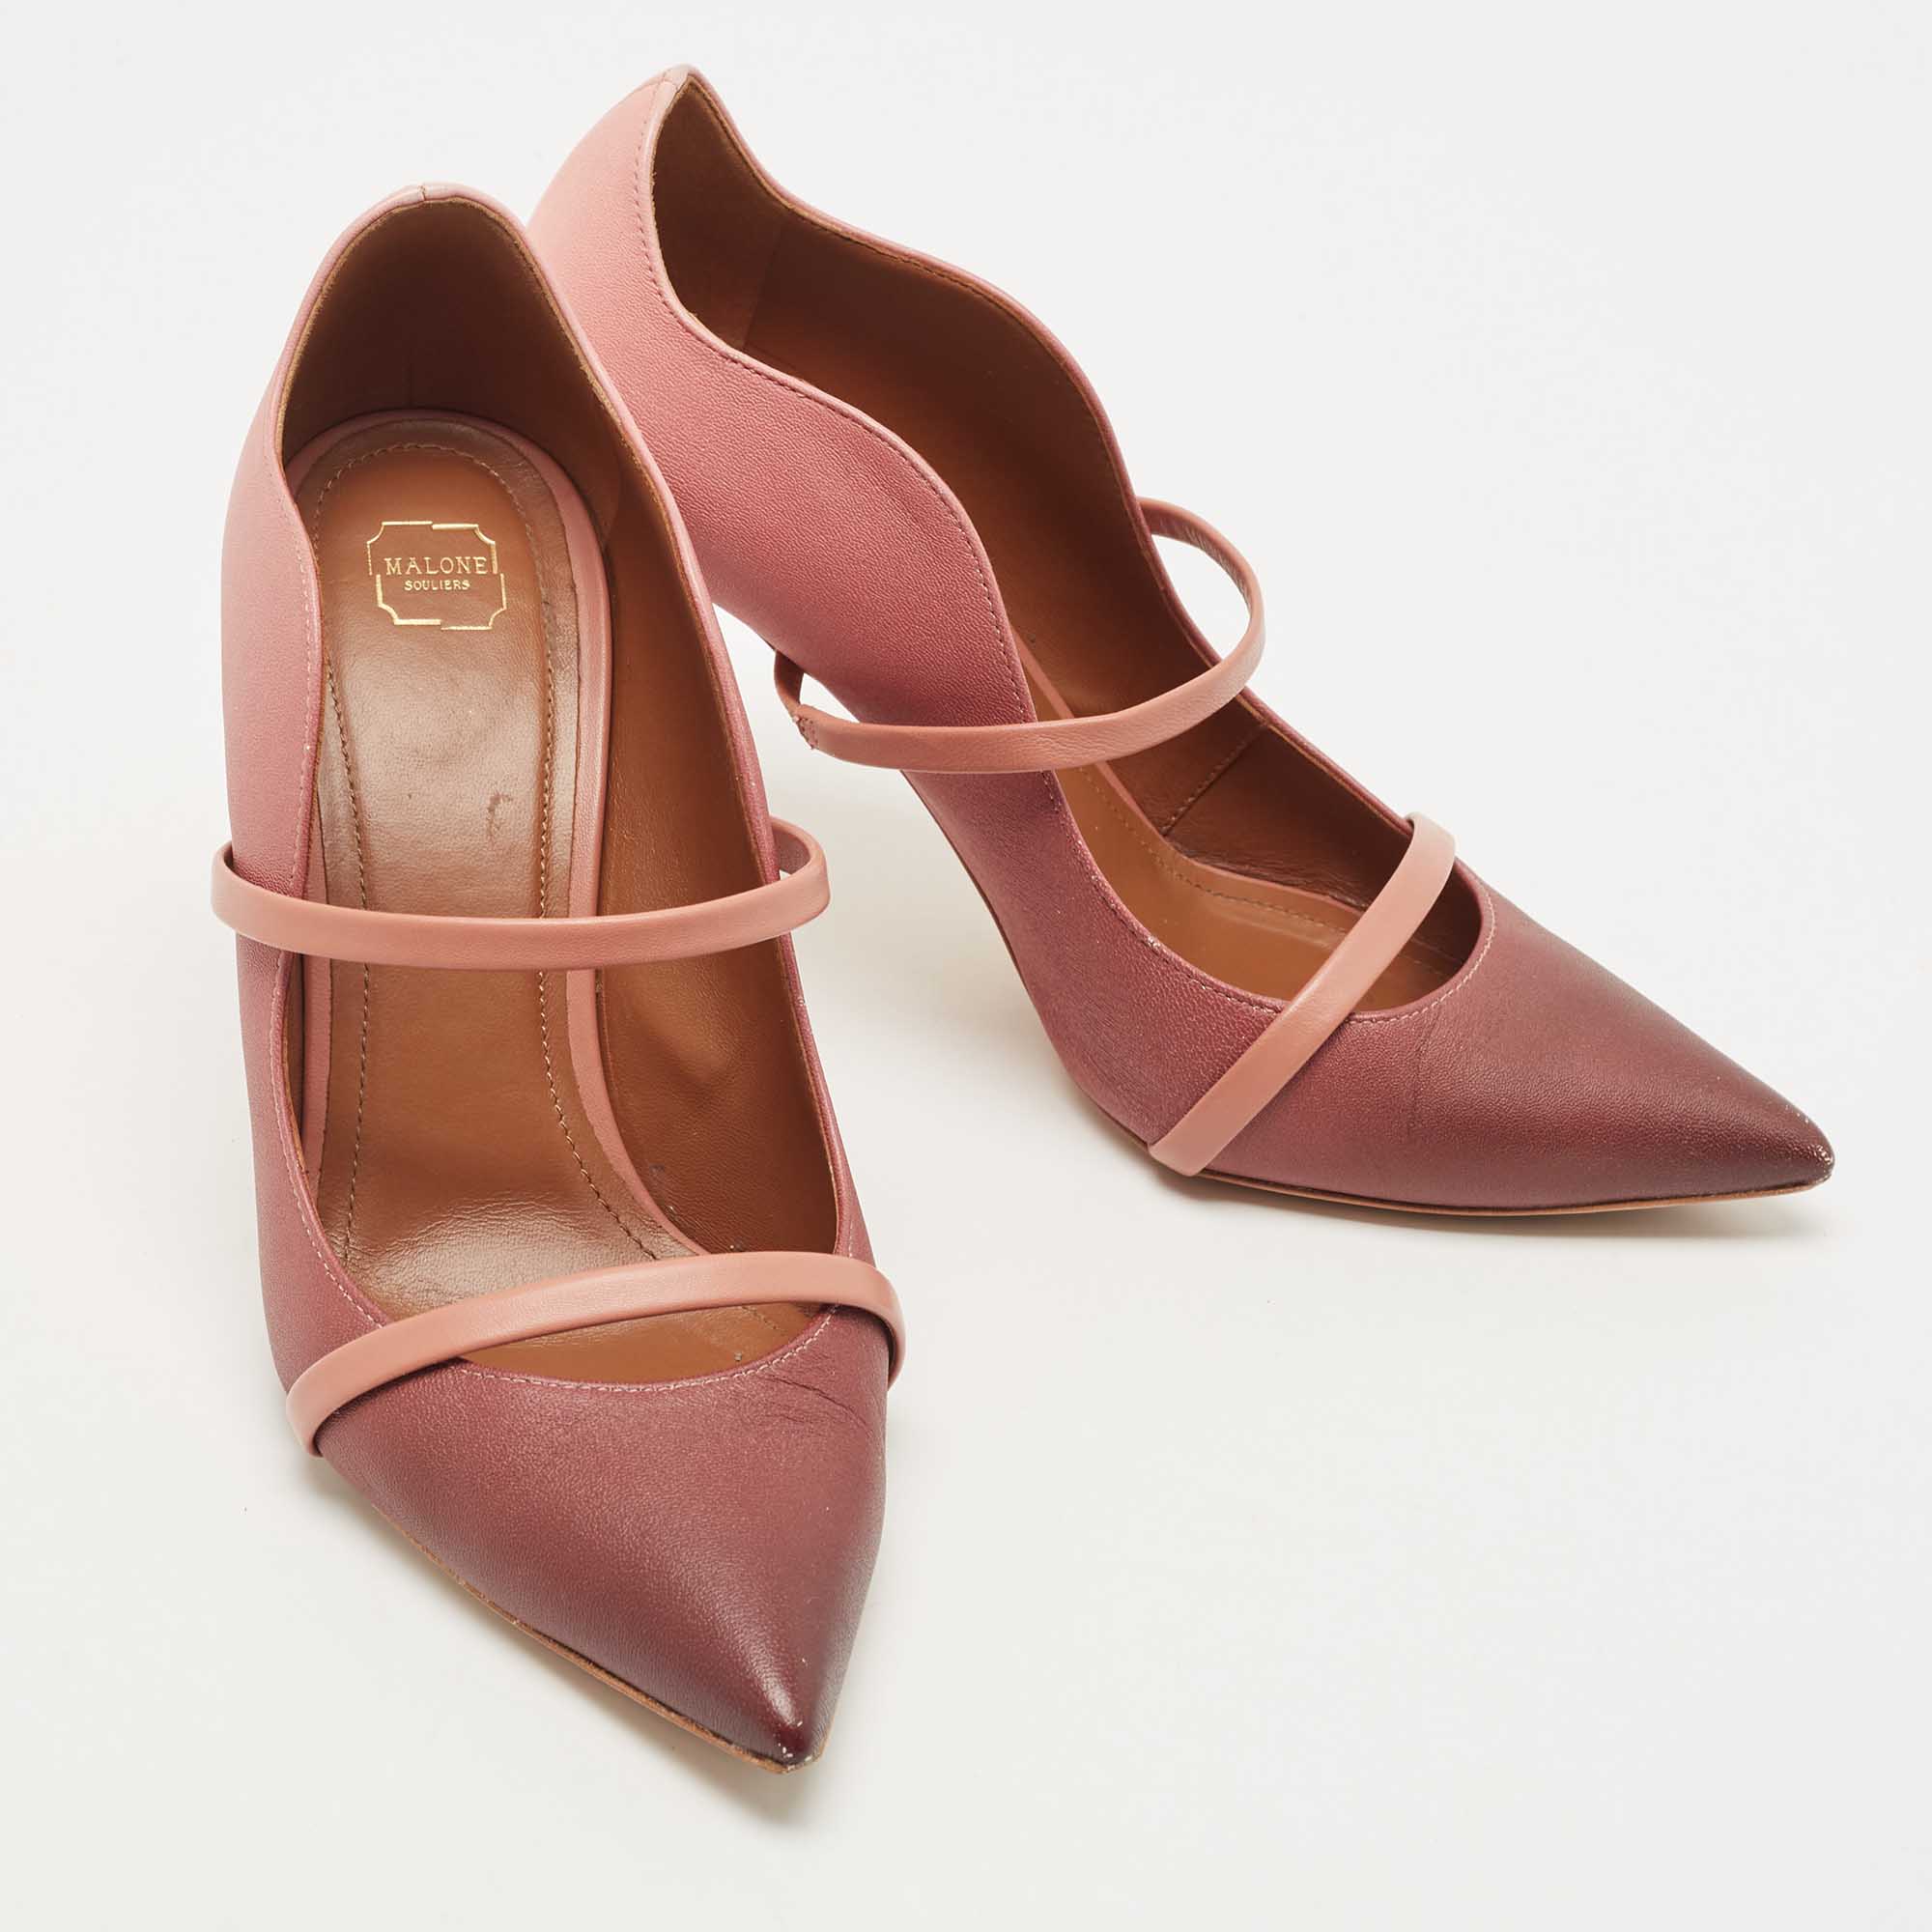 Malone Souliers Pink/Burgundy Leather Maureen Pointed Toe Pumps Size 40